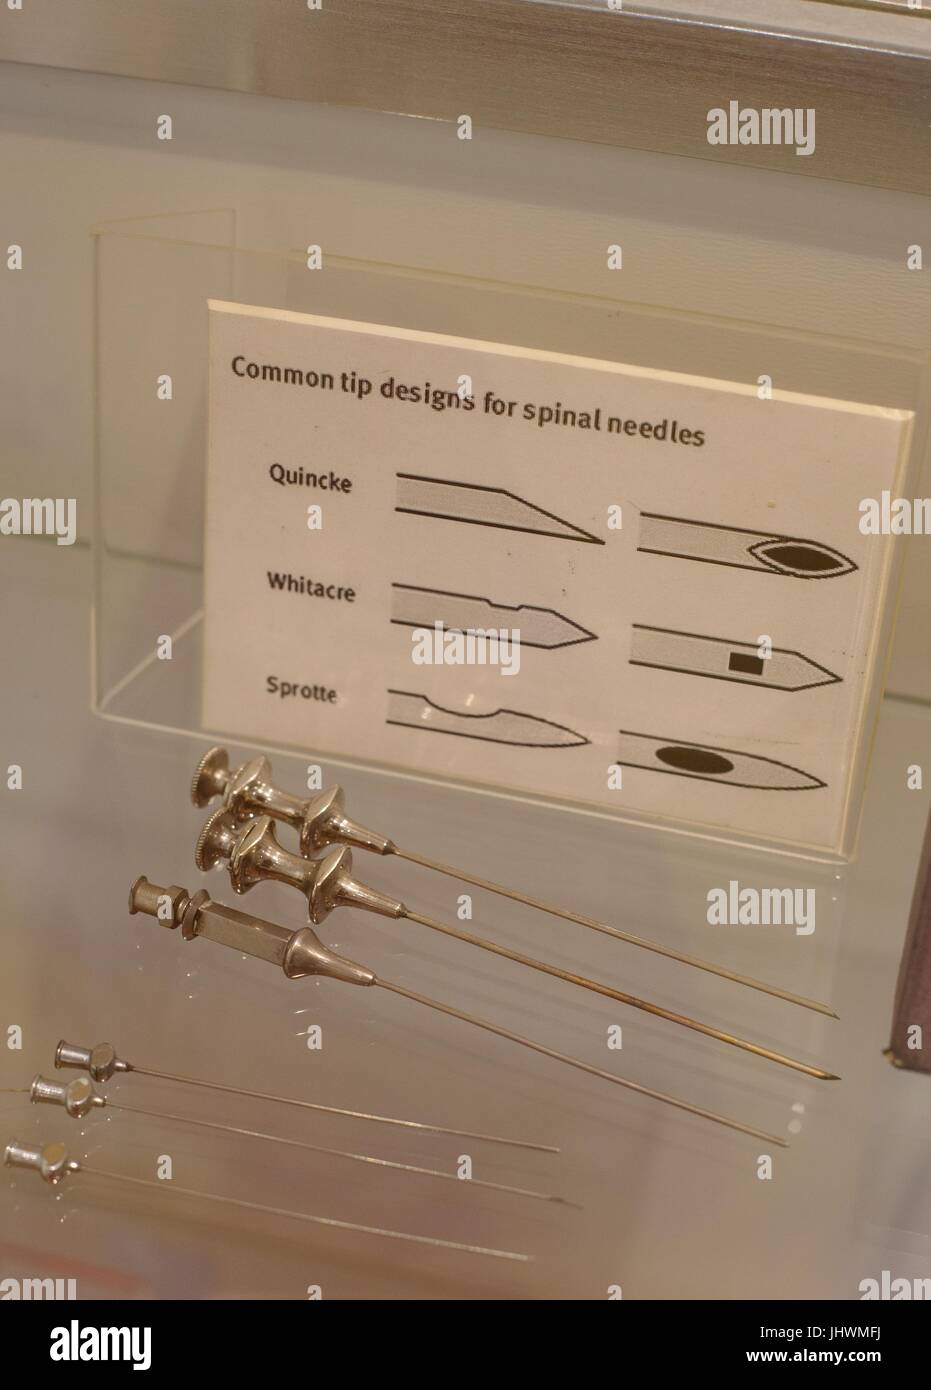 A display of spinal needles at the International Museum of Surgical Sciences in Chicago, Illinois, USA. Stock Photo